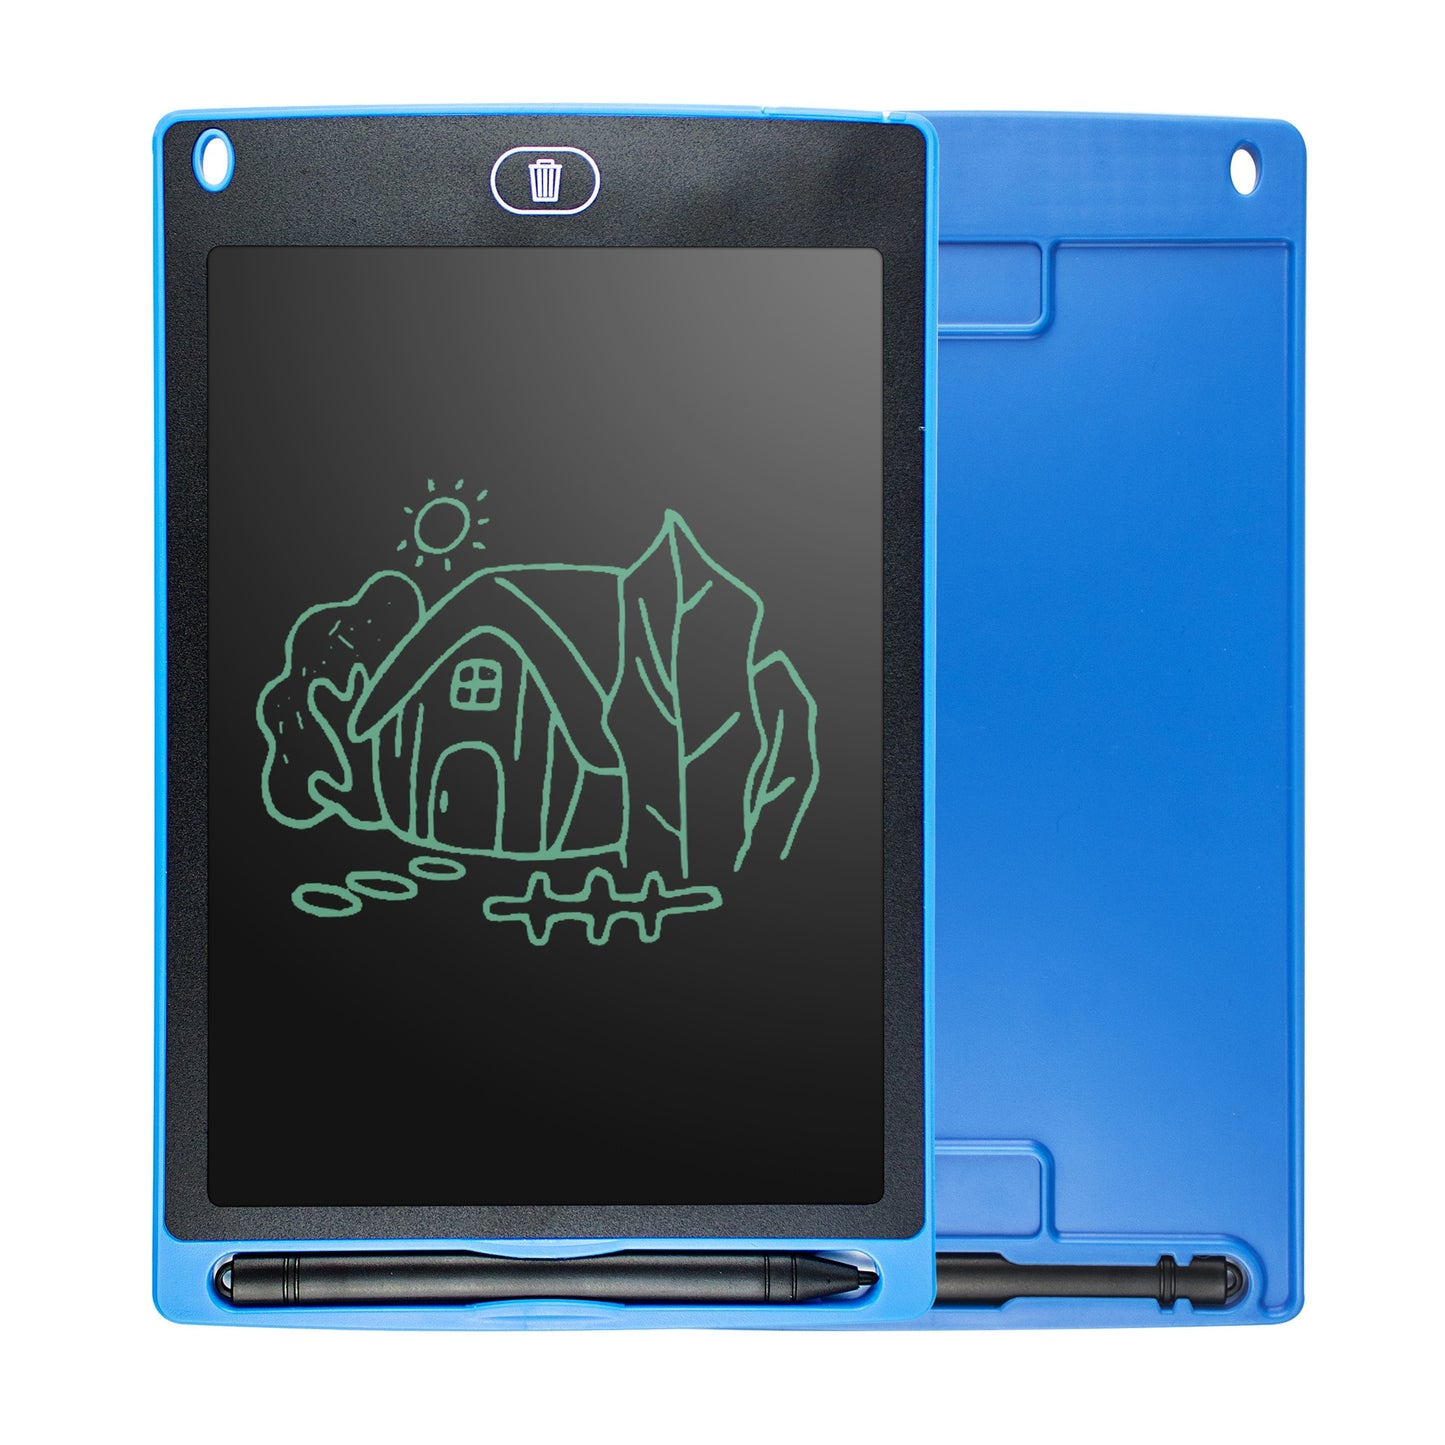 LCD drawing tablet